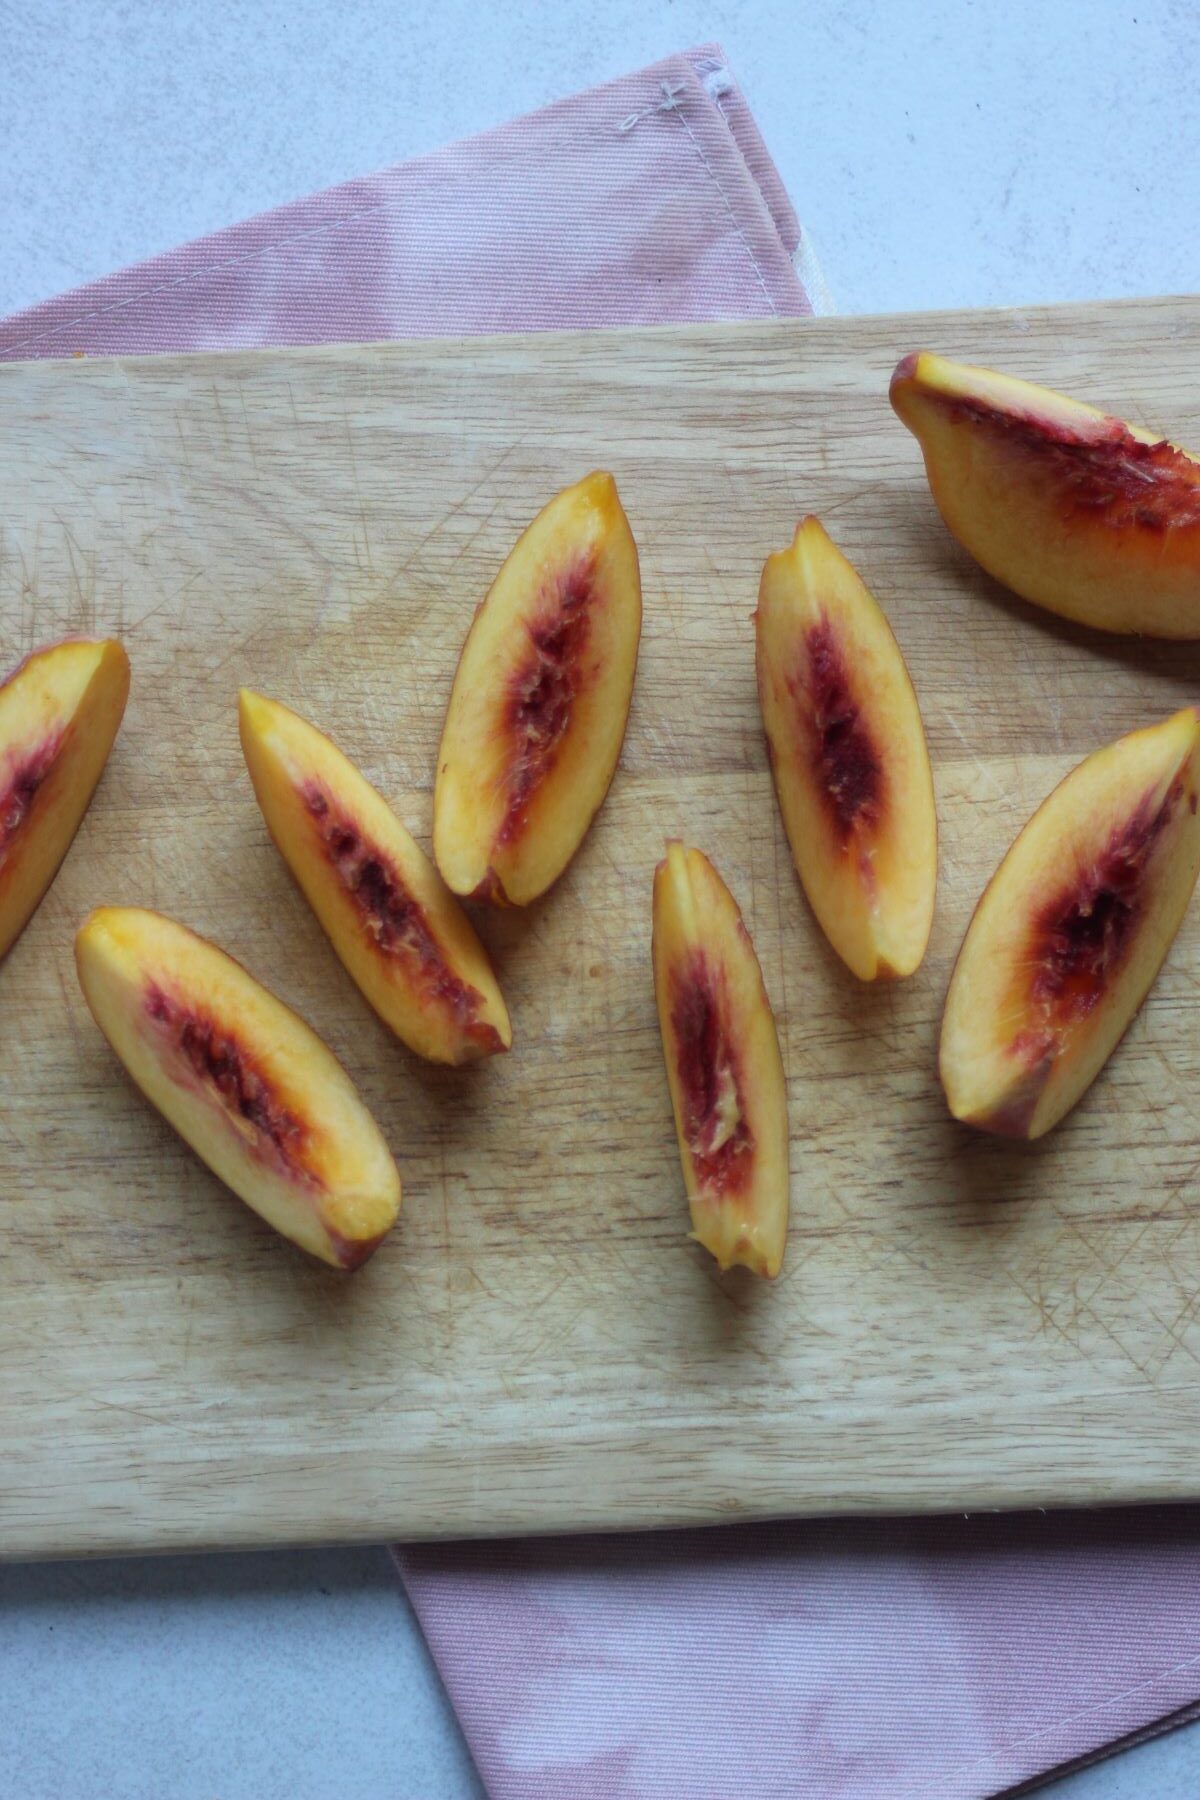 Sliced peaches on a wooden board.